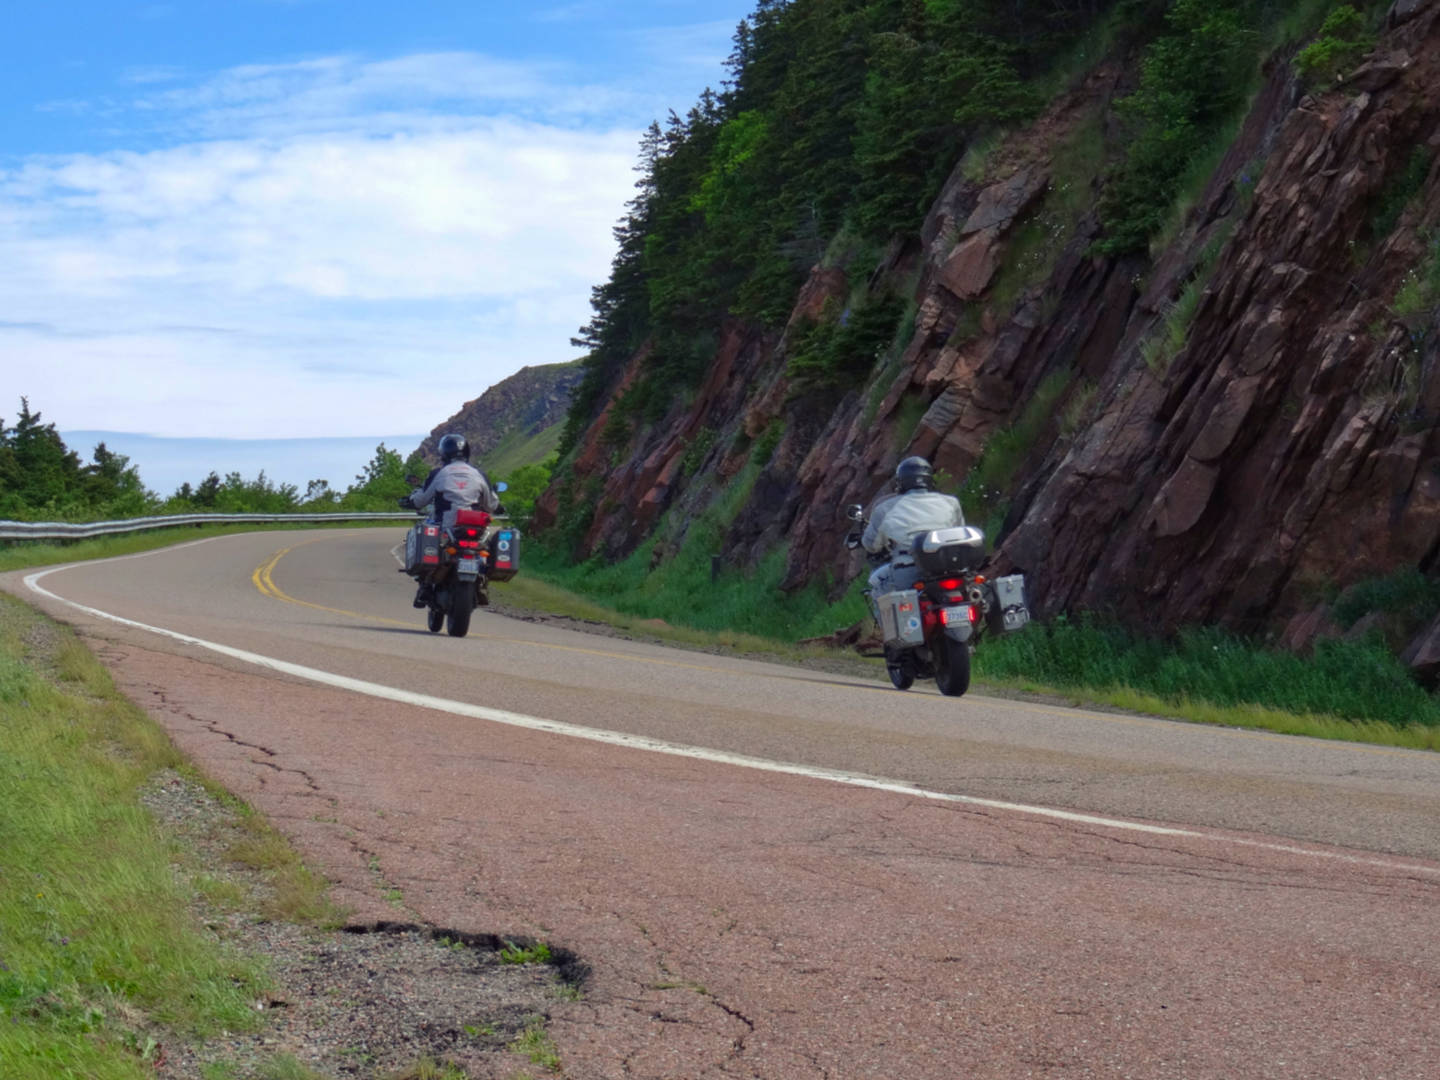 A photo of 2 motorcycle riders on the Cabot Trail